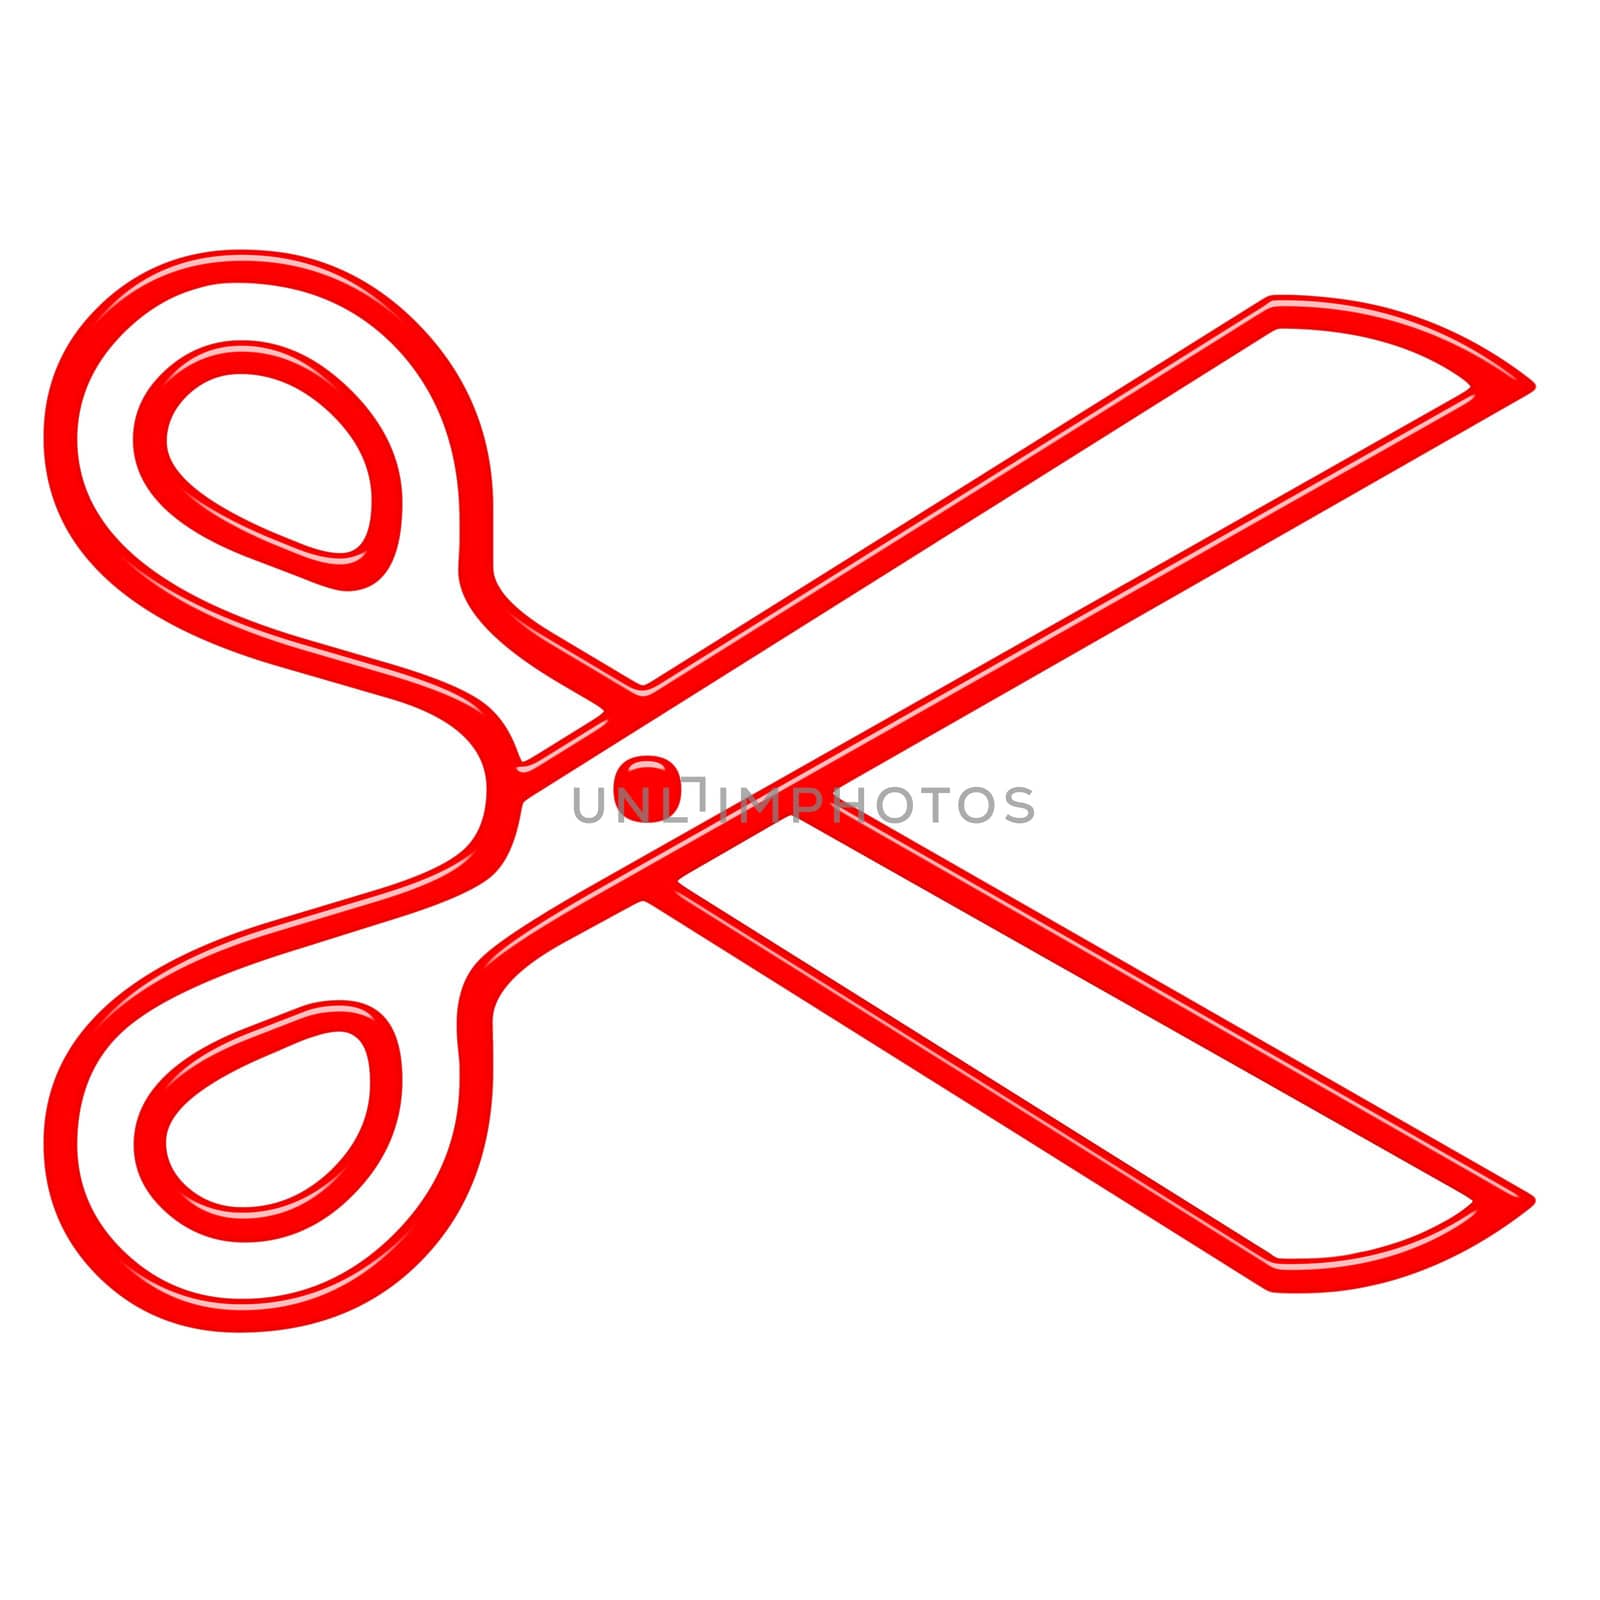 3d scissors isolated in white